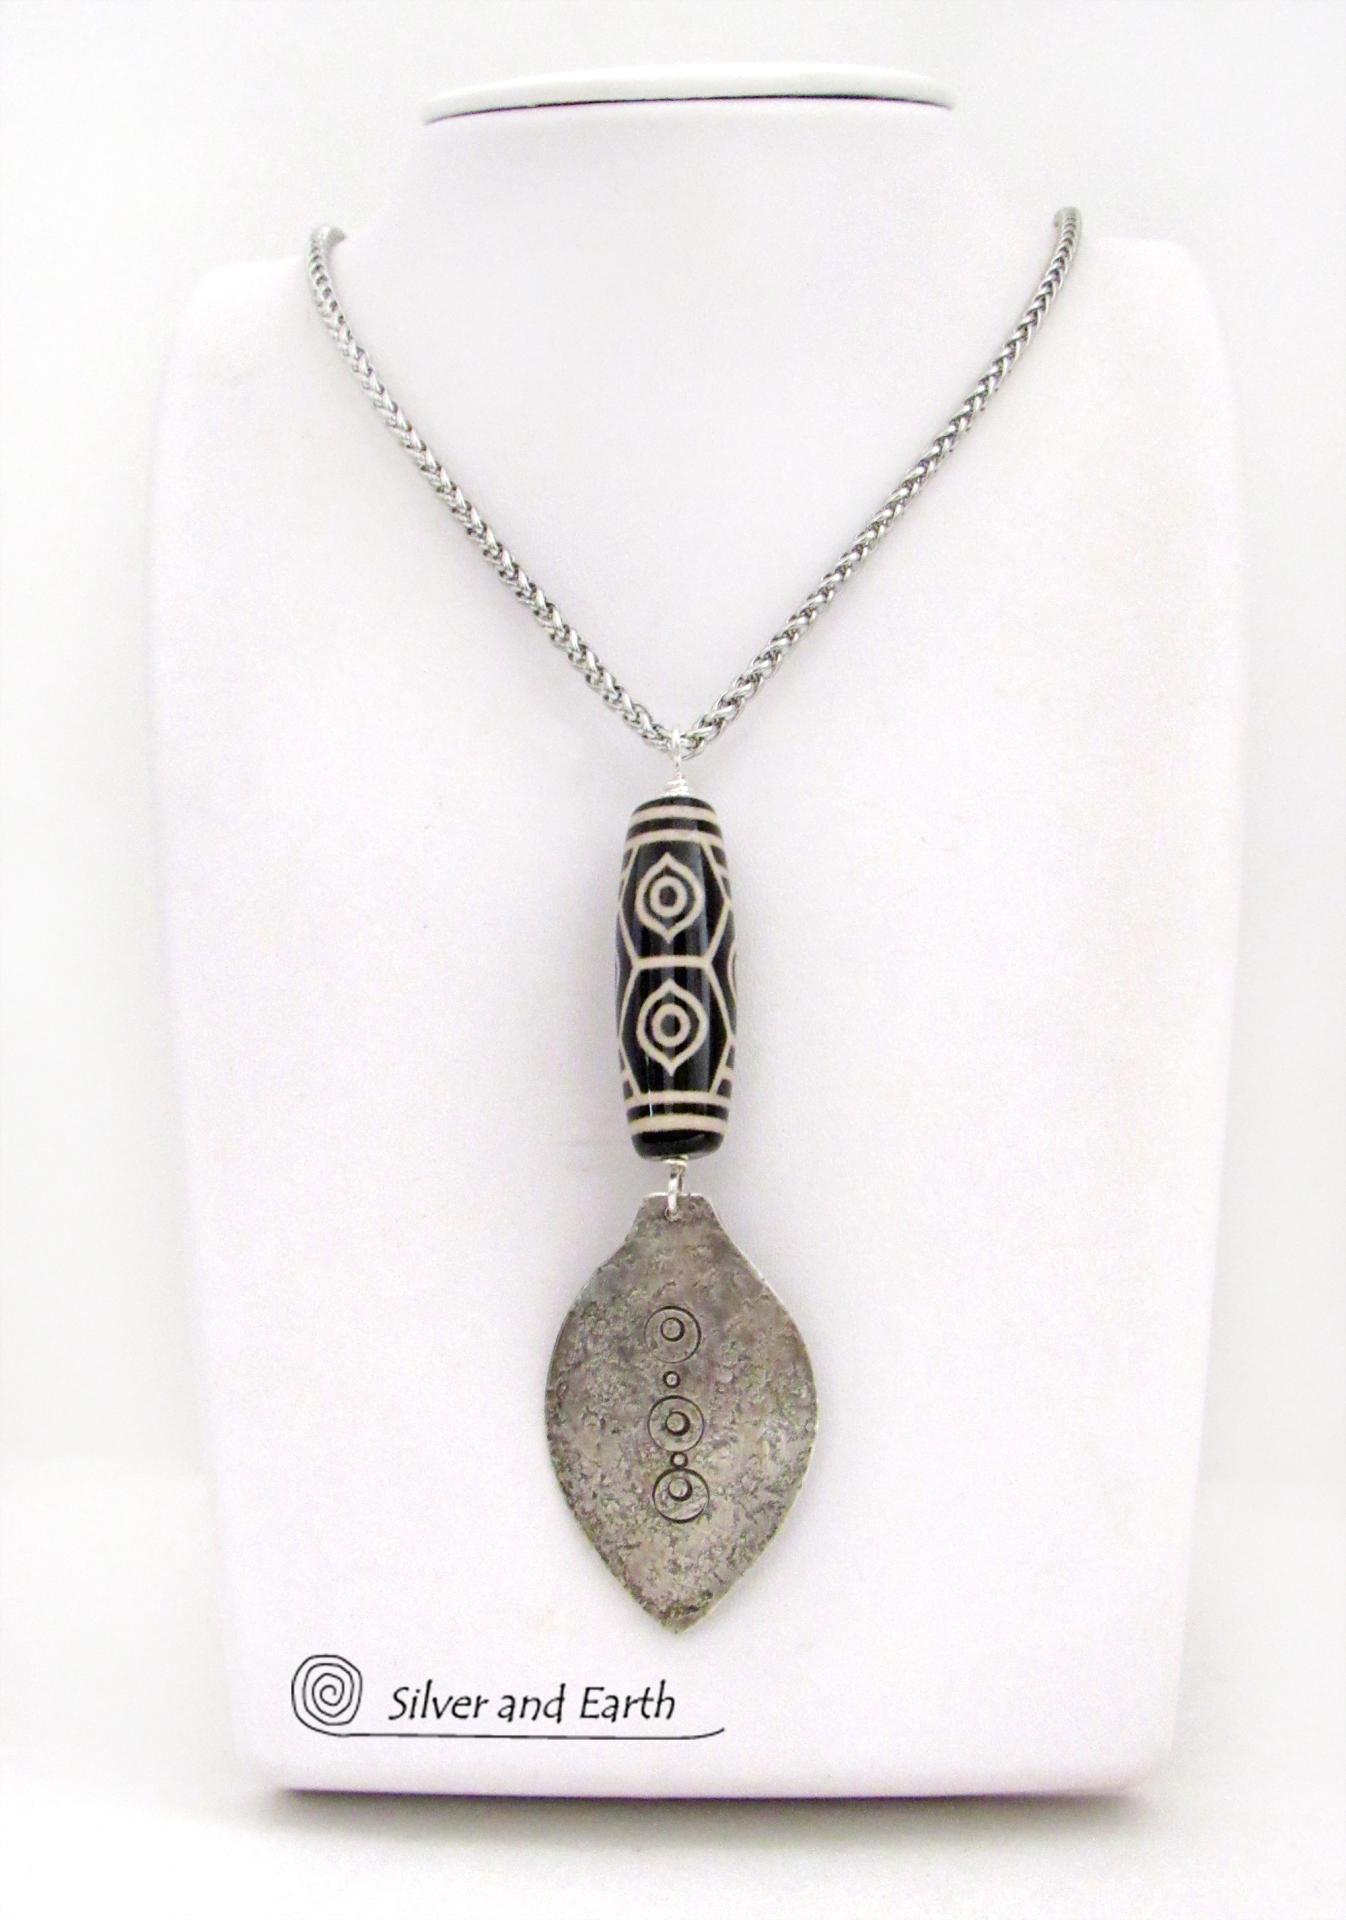 Black And White Tibetan Agate Sterling Silver Necklace - Bold Ethnic Bohemian Style Jewelry 